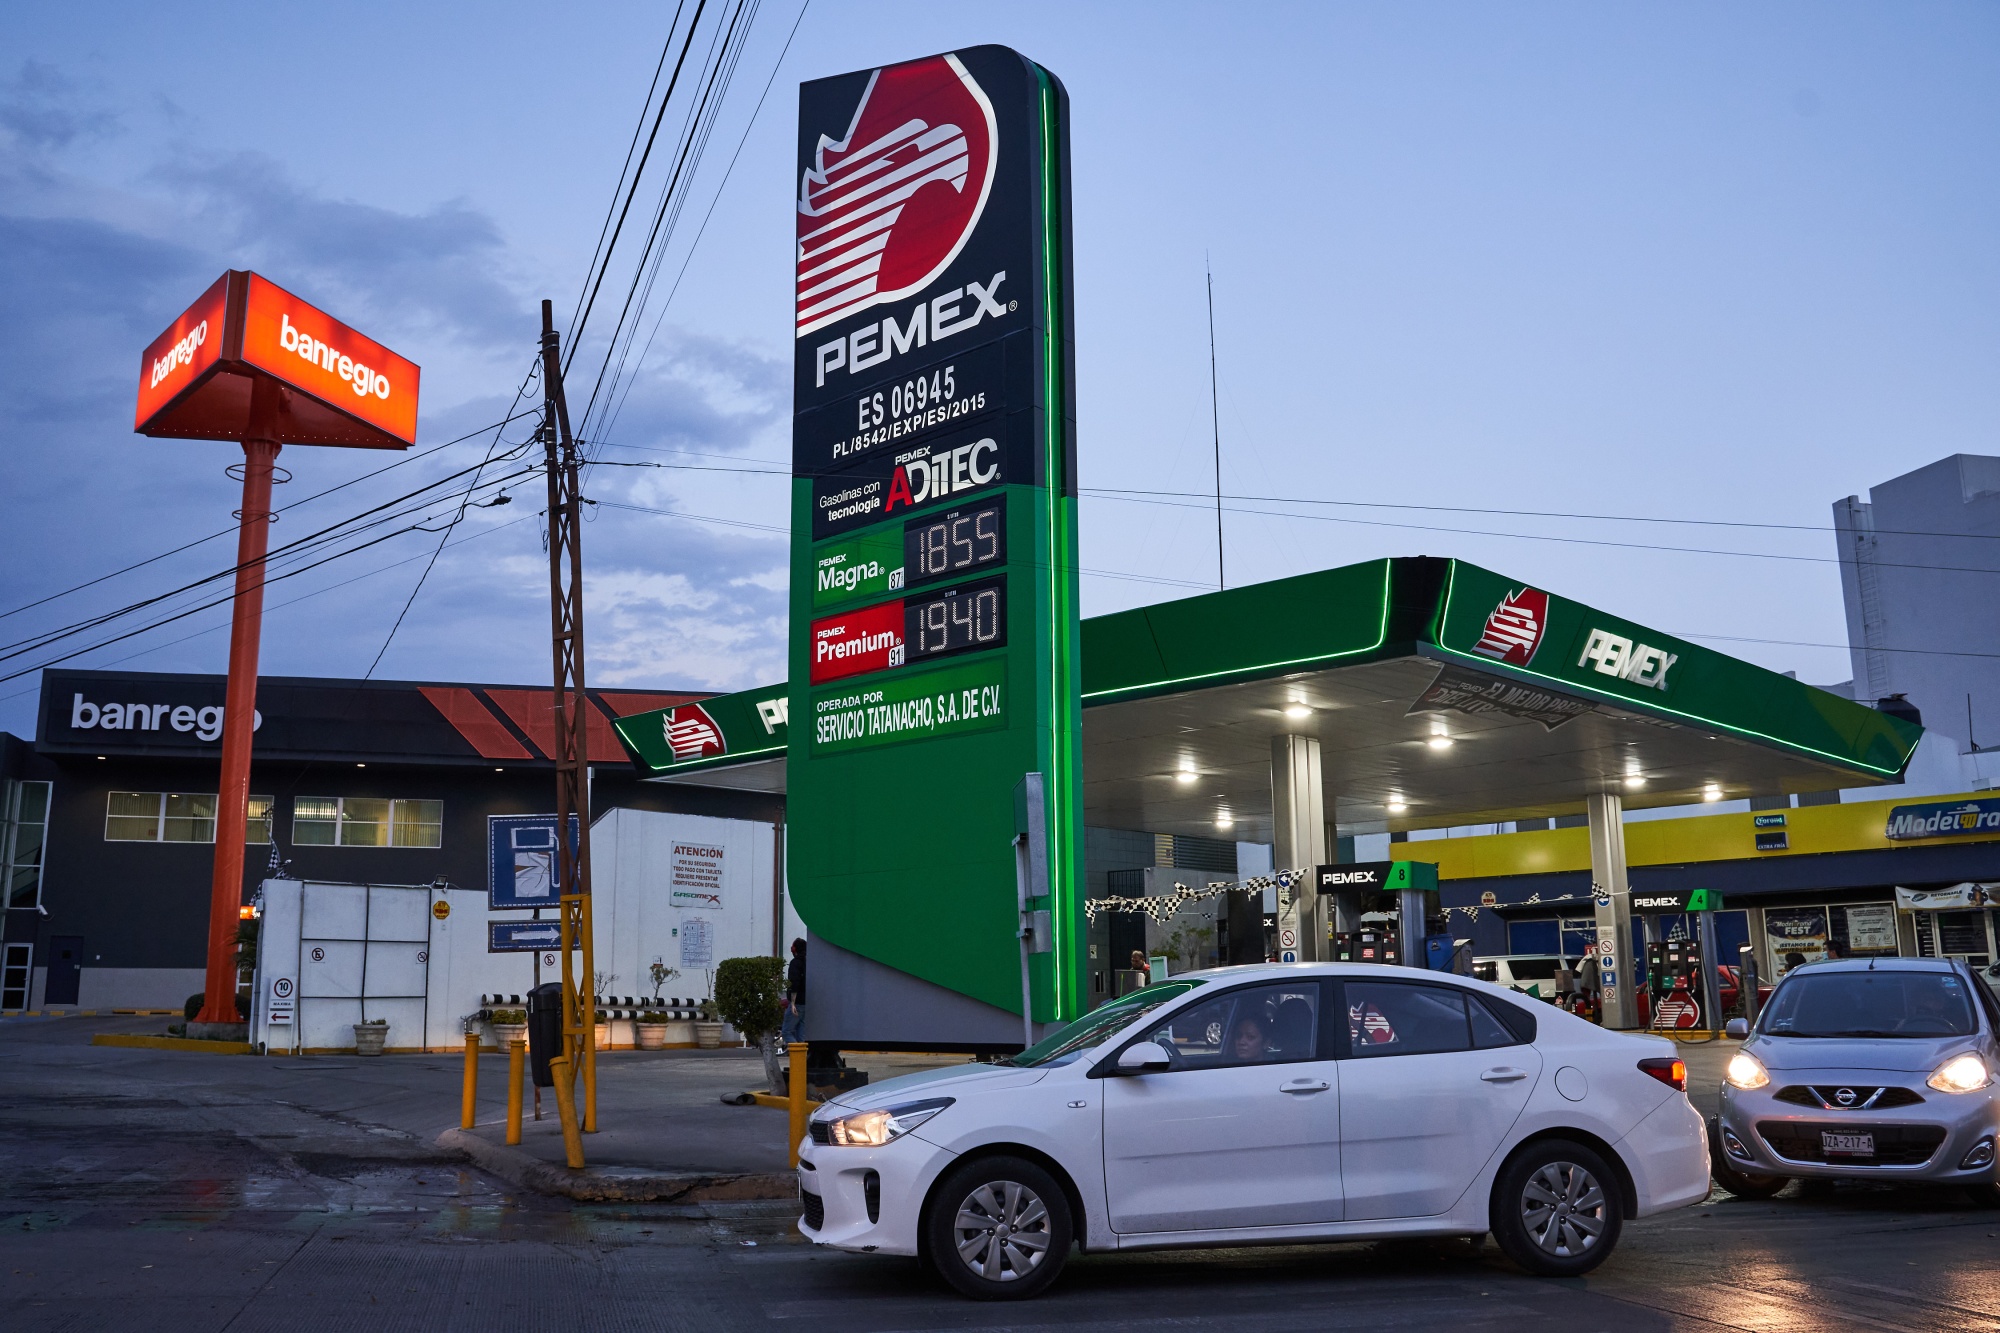 Vehicles pass in front of a Petroleos Mexicanos (Pemex) gas station in San Luis Potosi, Mexico, on Tuesday, Jan. 19, 2021.&nbsp;